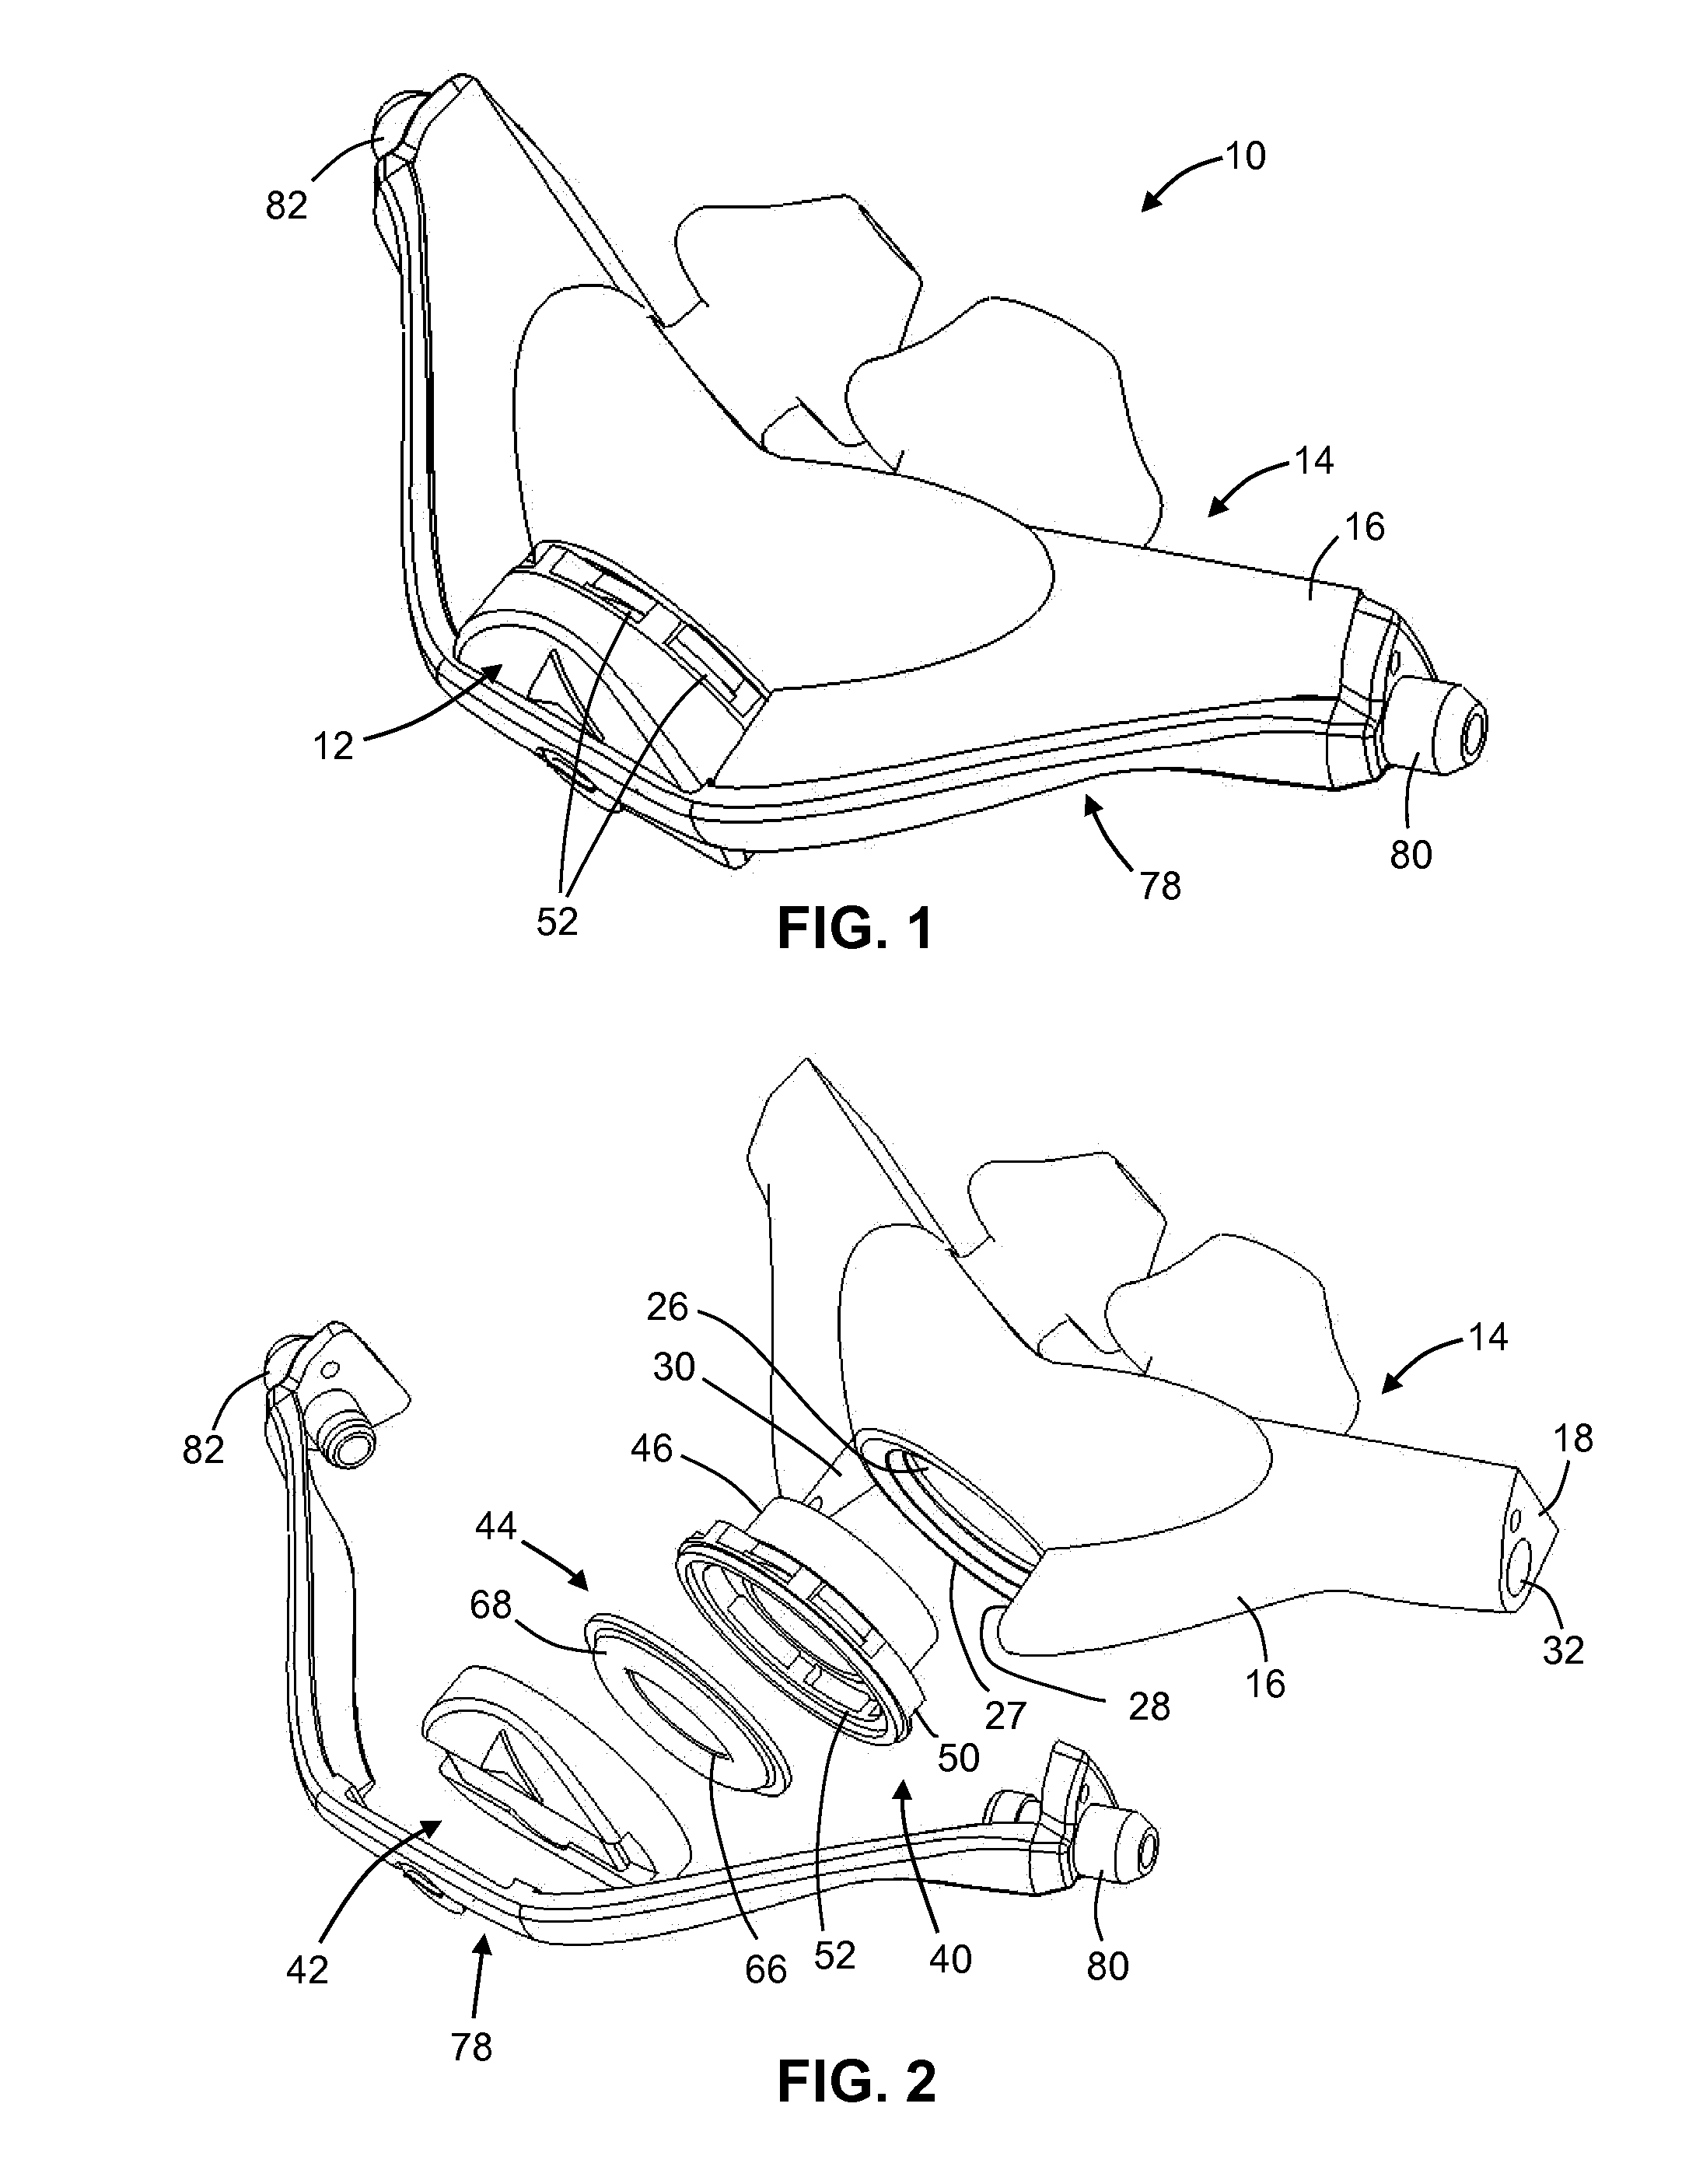 Ventilation mask with integrated piloted exalation valve